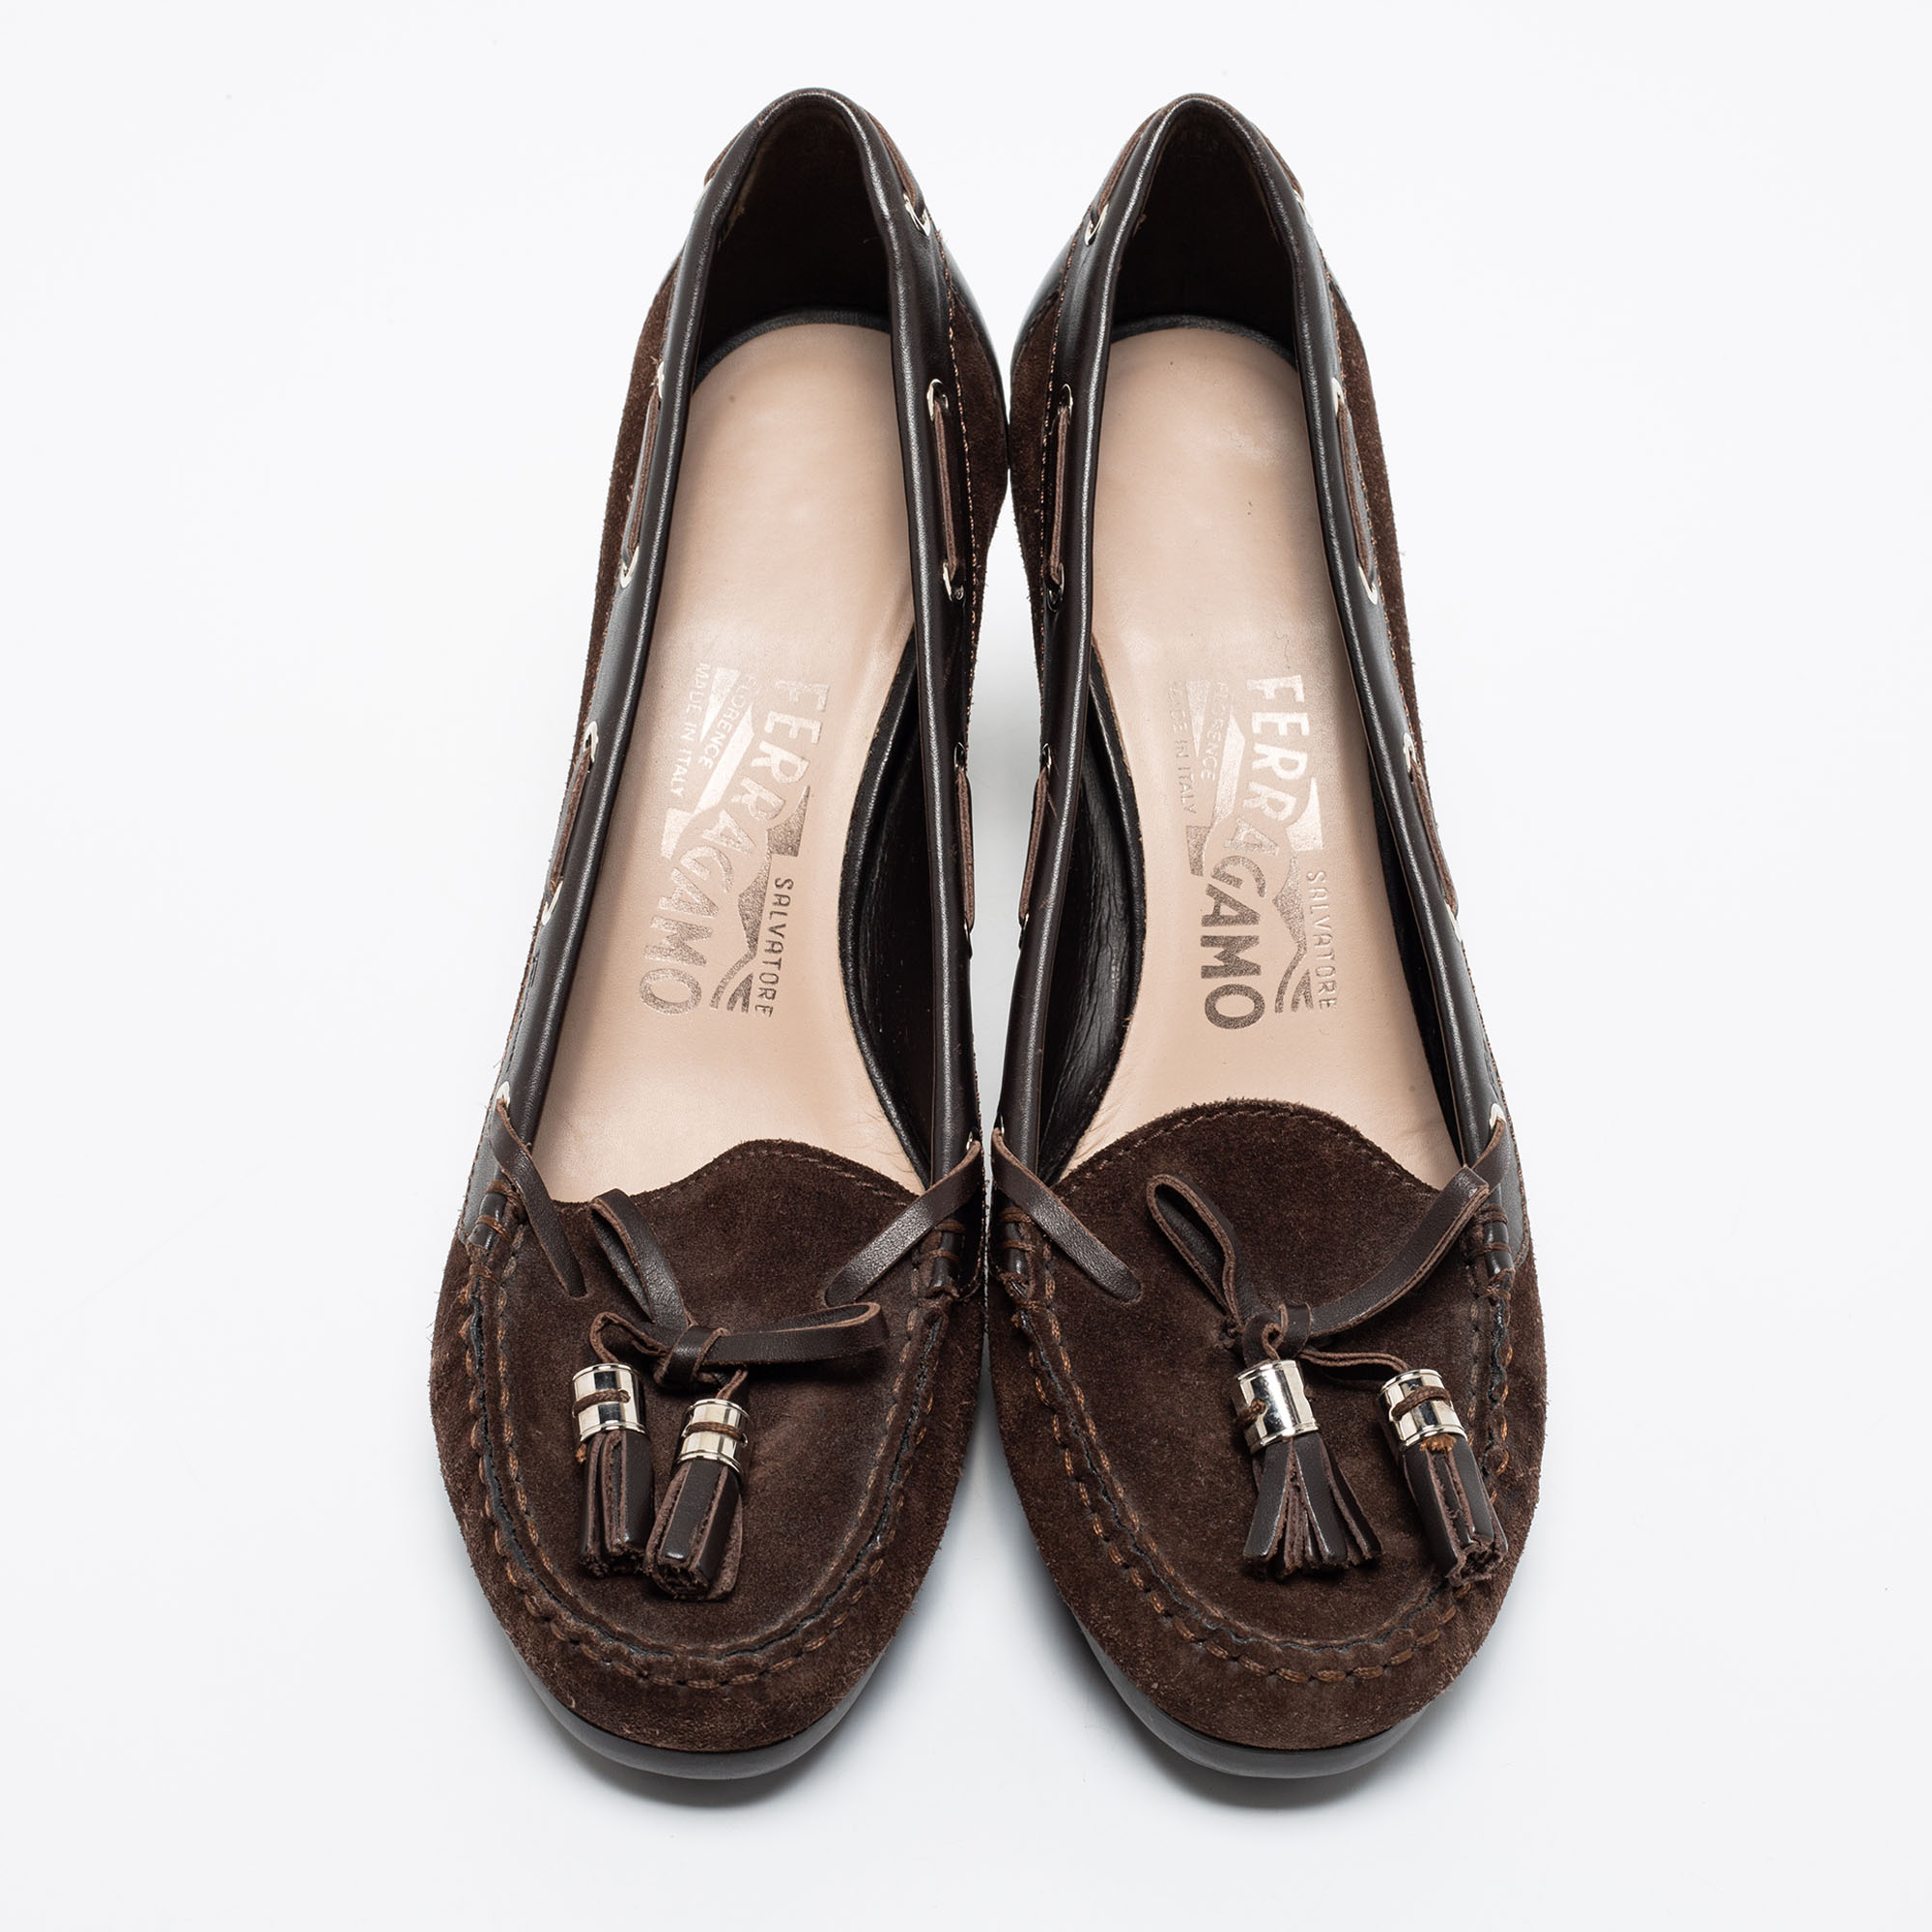 Salvatore Ferragamo Brown Suede And Leather Loafer Pumps Size 37